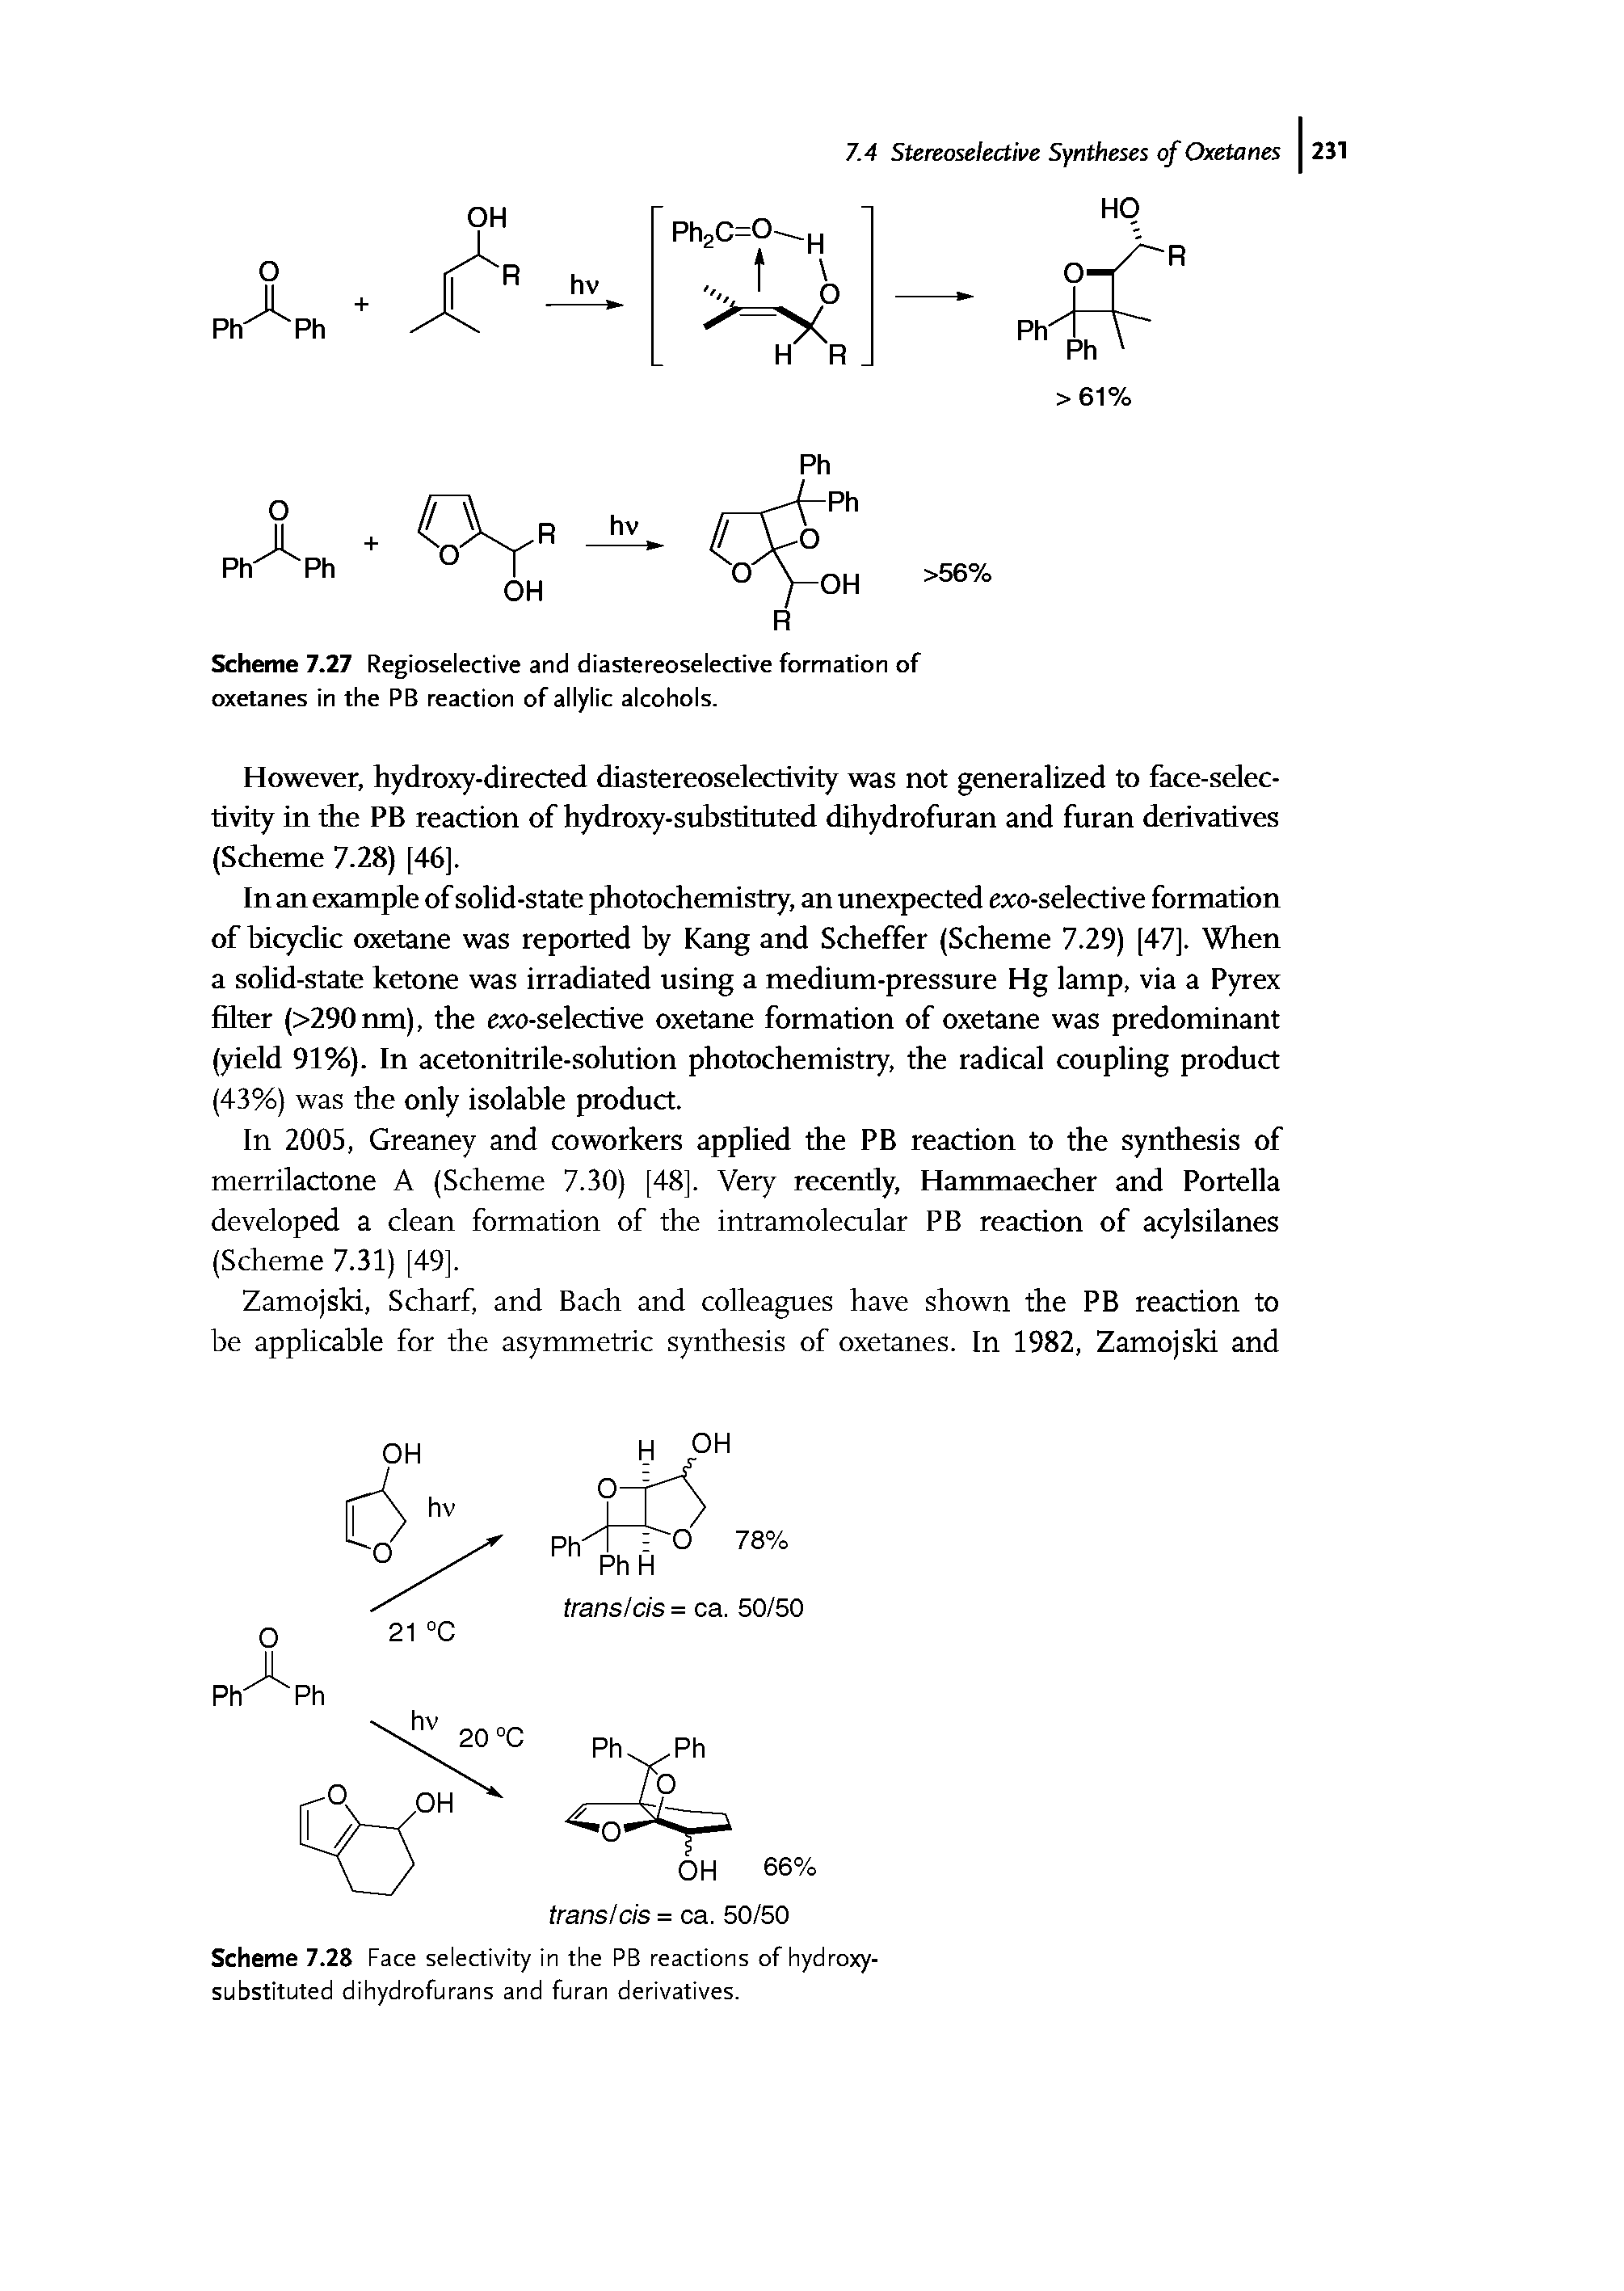 Scheme 7.28 Face selectivity in the PB reactions of hydroxy-substituted dihydrofurans and furan derivatives.